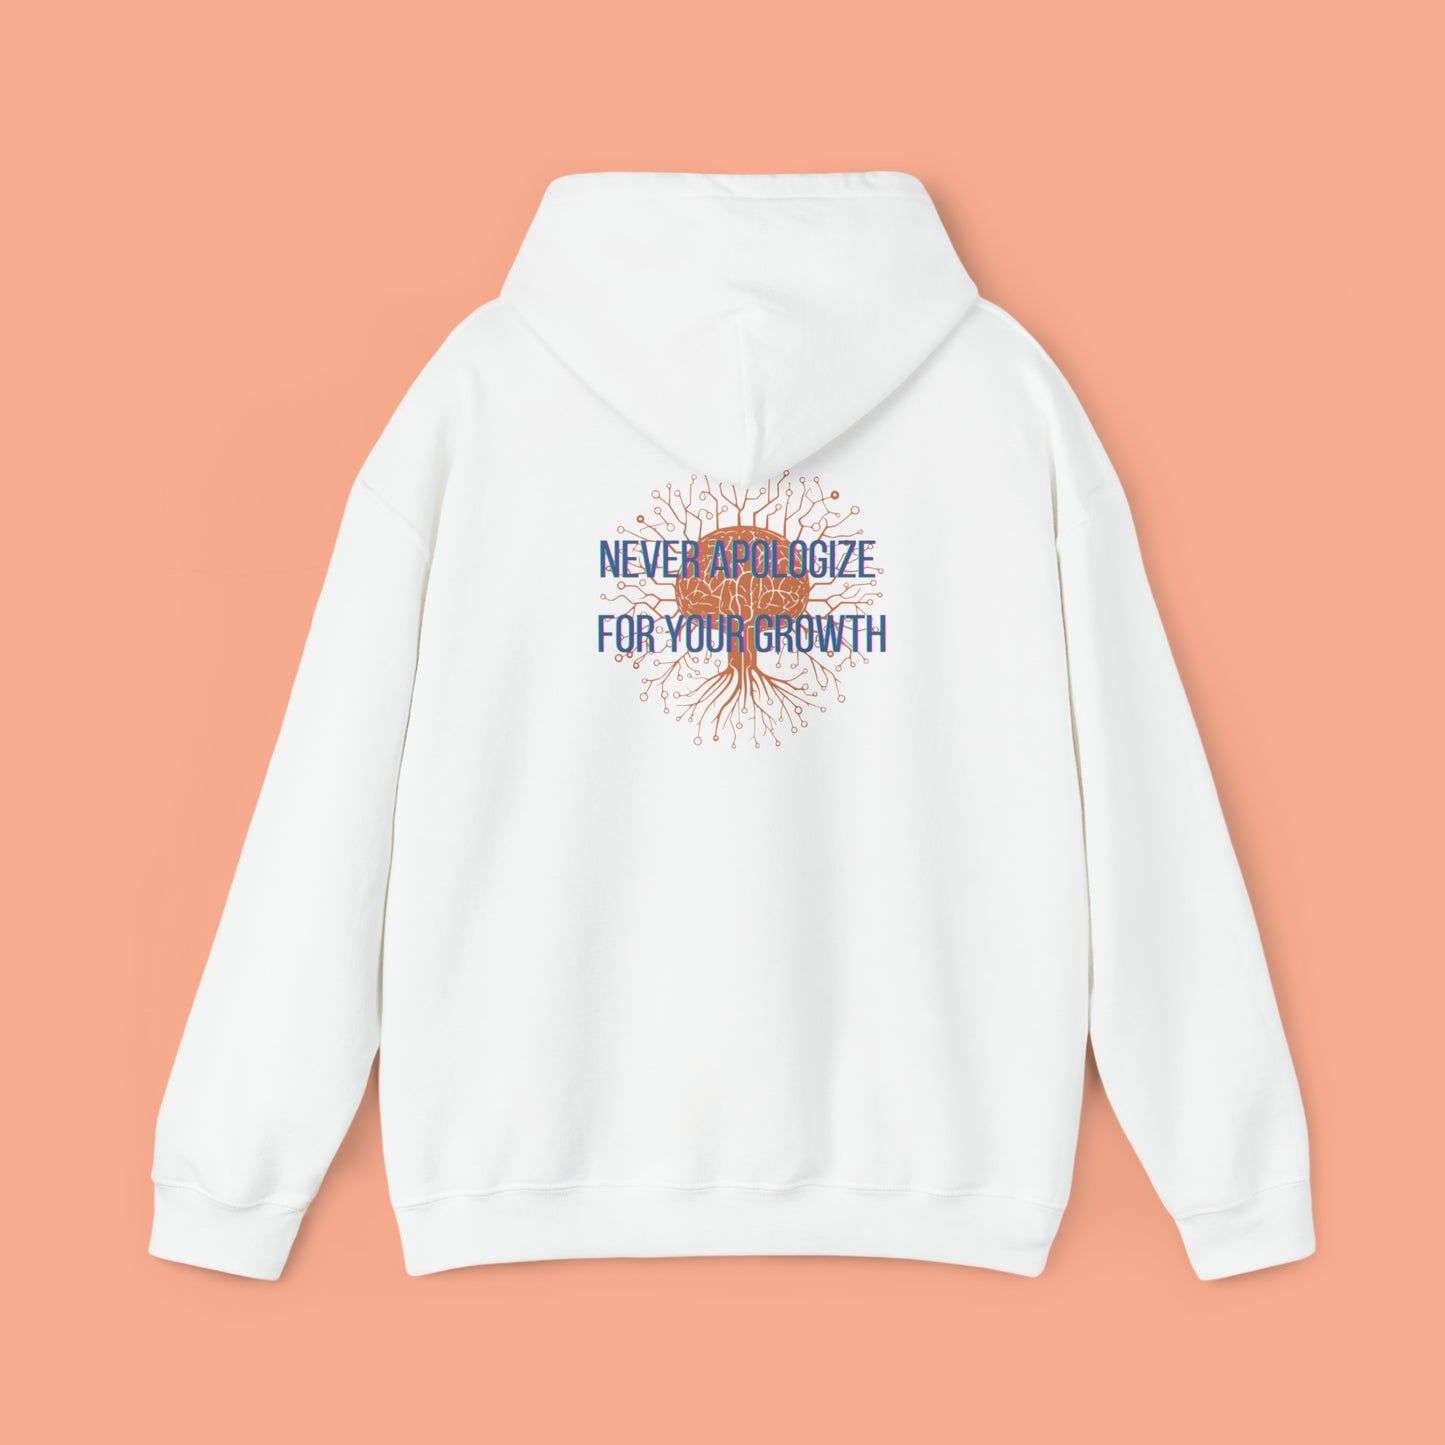 Never apologize for your growth message on this Unisex Heavy Blend™ Hooded Sweatshirt